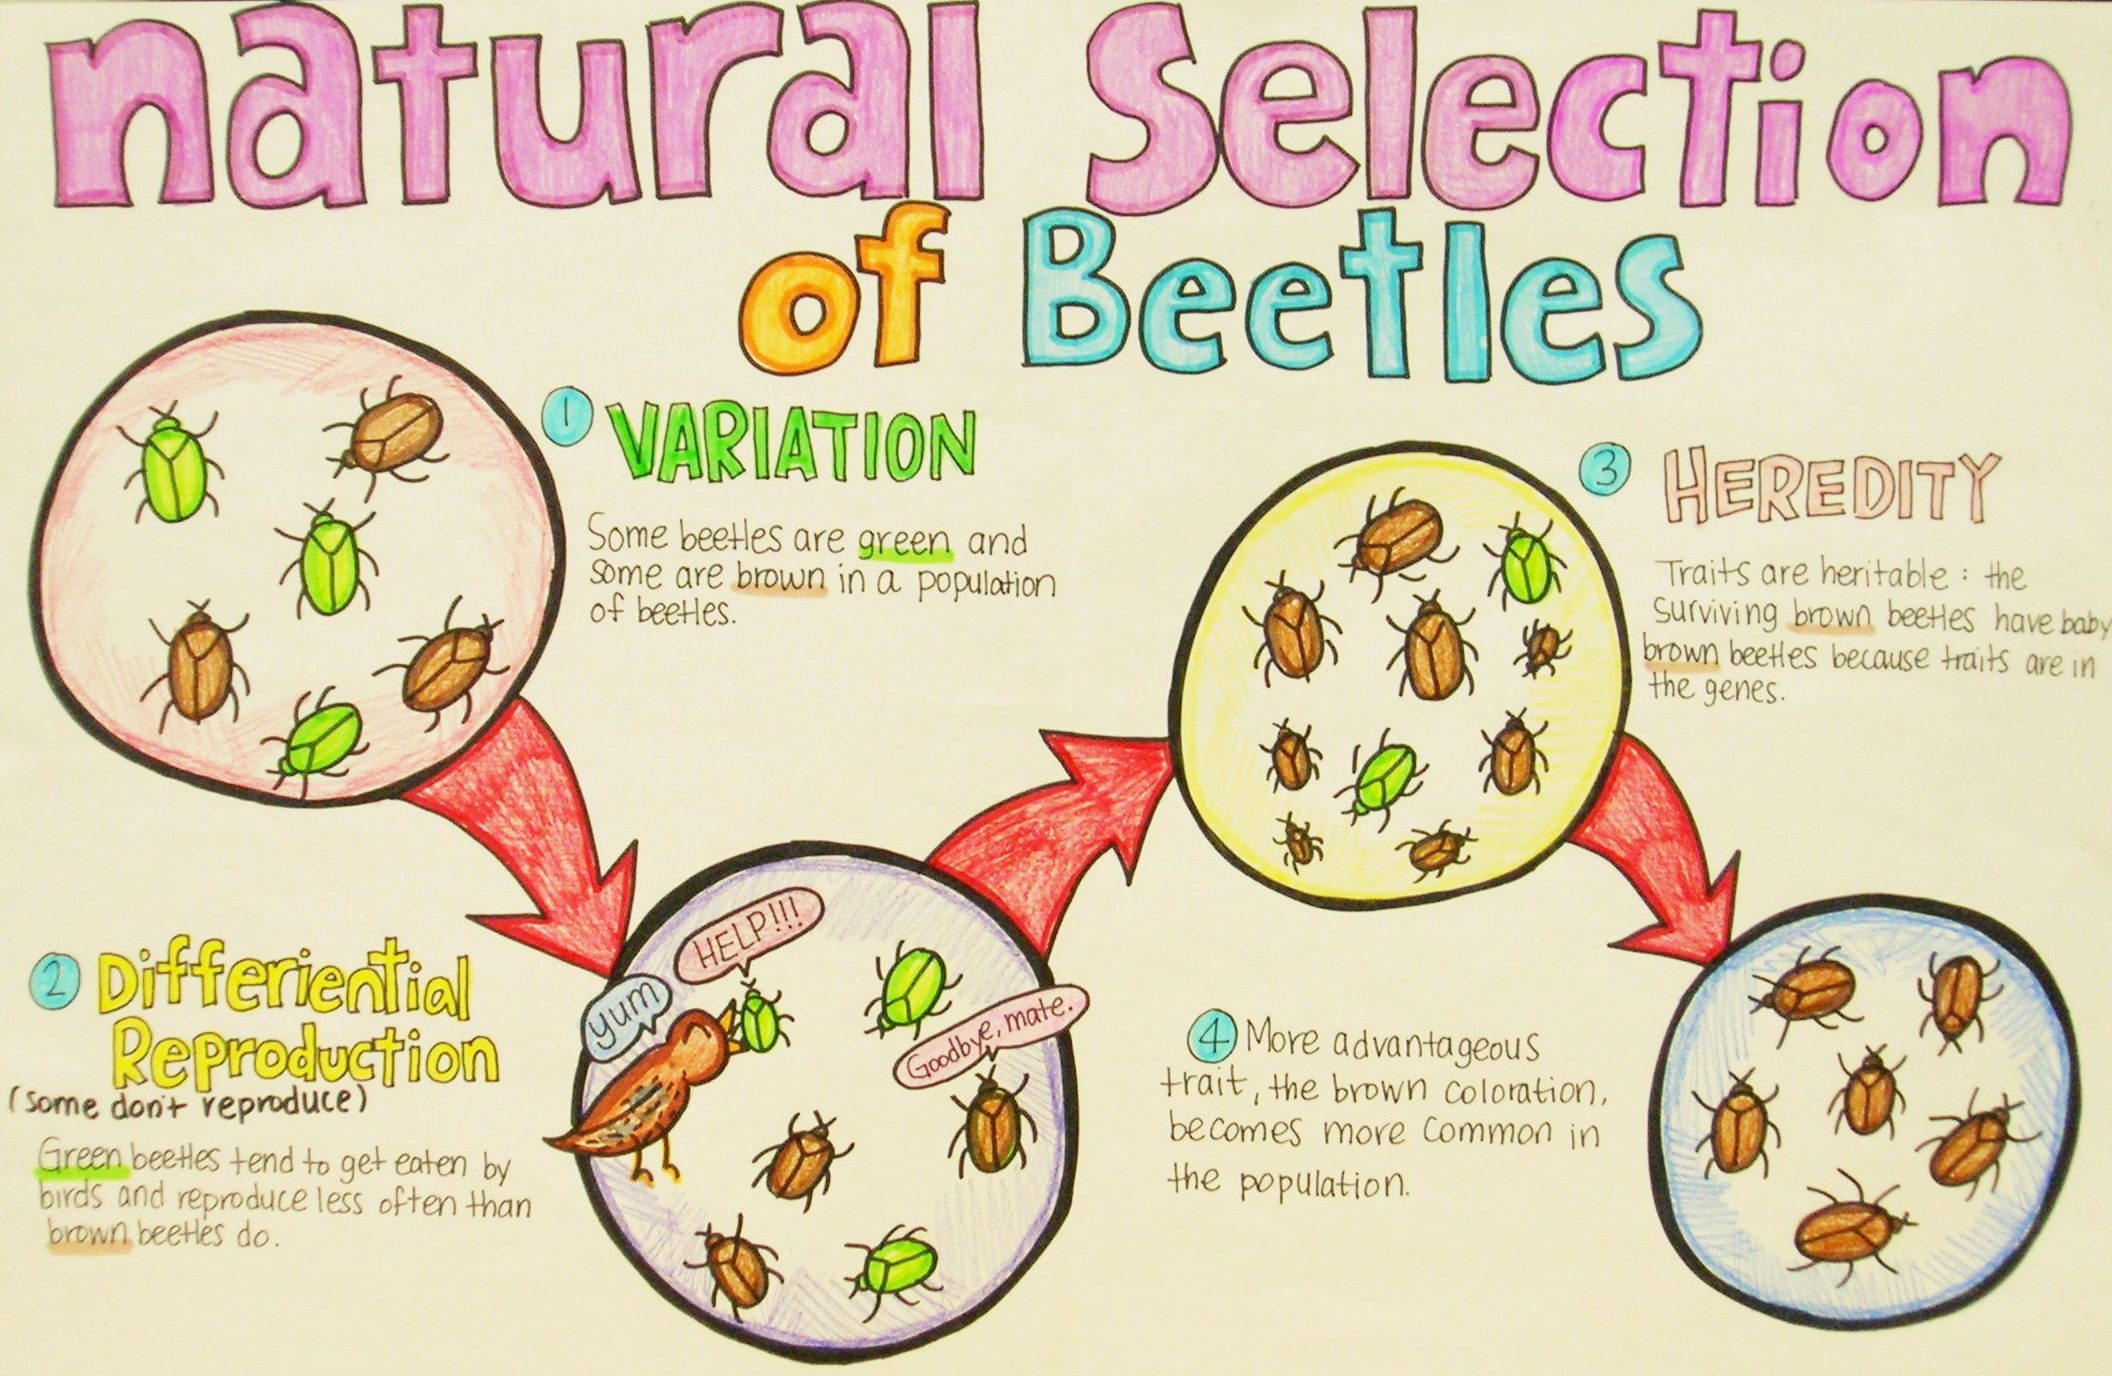 Natural selection example 9th grade science poster. Photo © Enokson / Flickr through a Creative Commons license